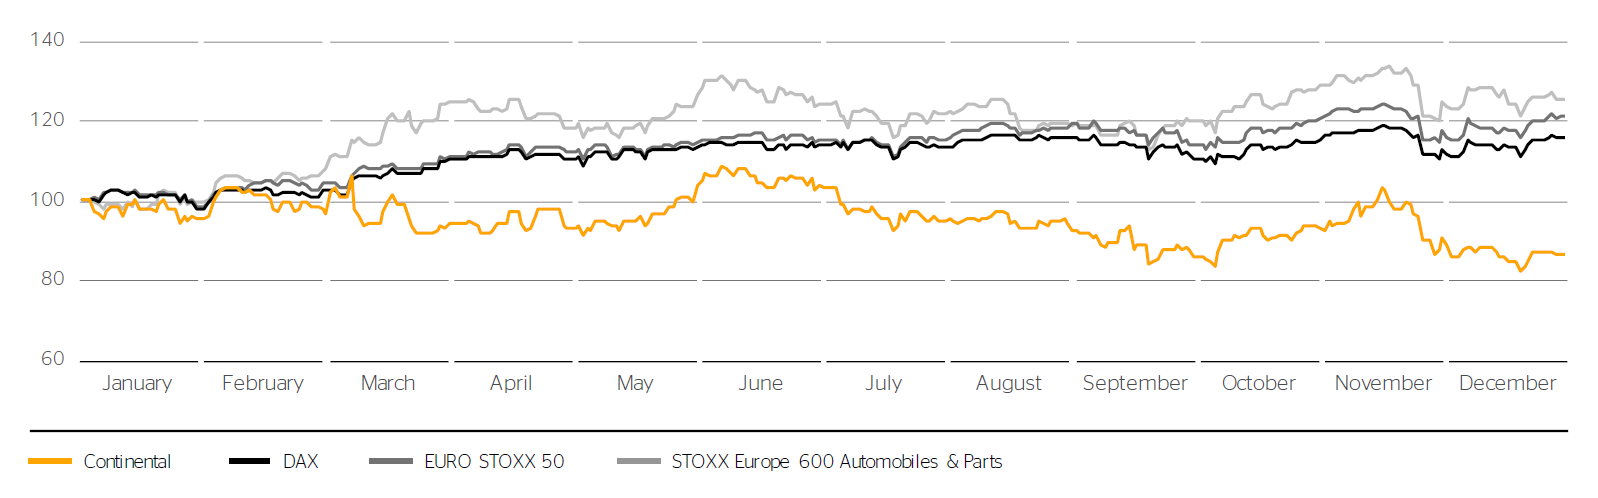 Price performance of Continental shares in 2021 versus selected stock indexes